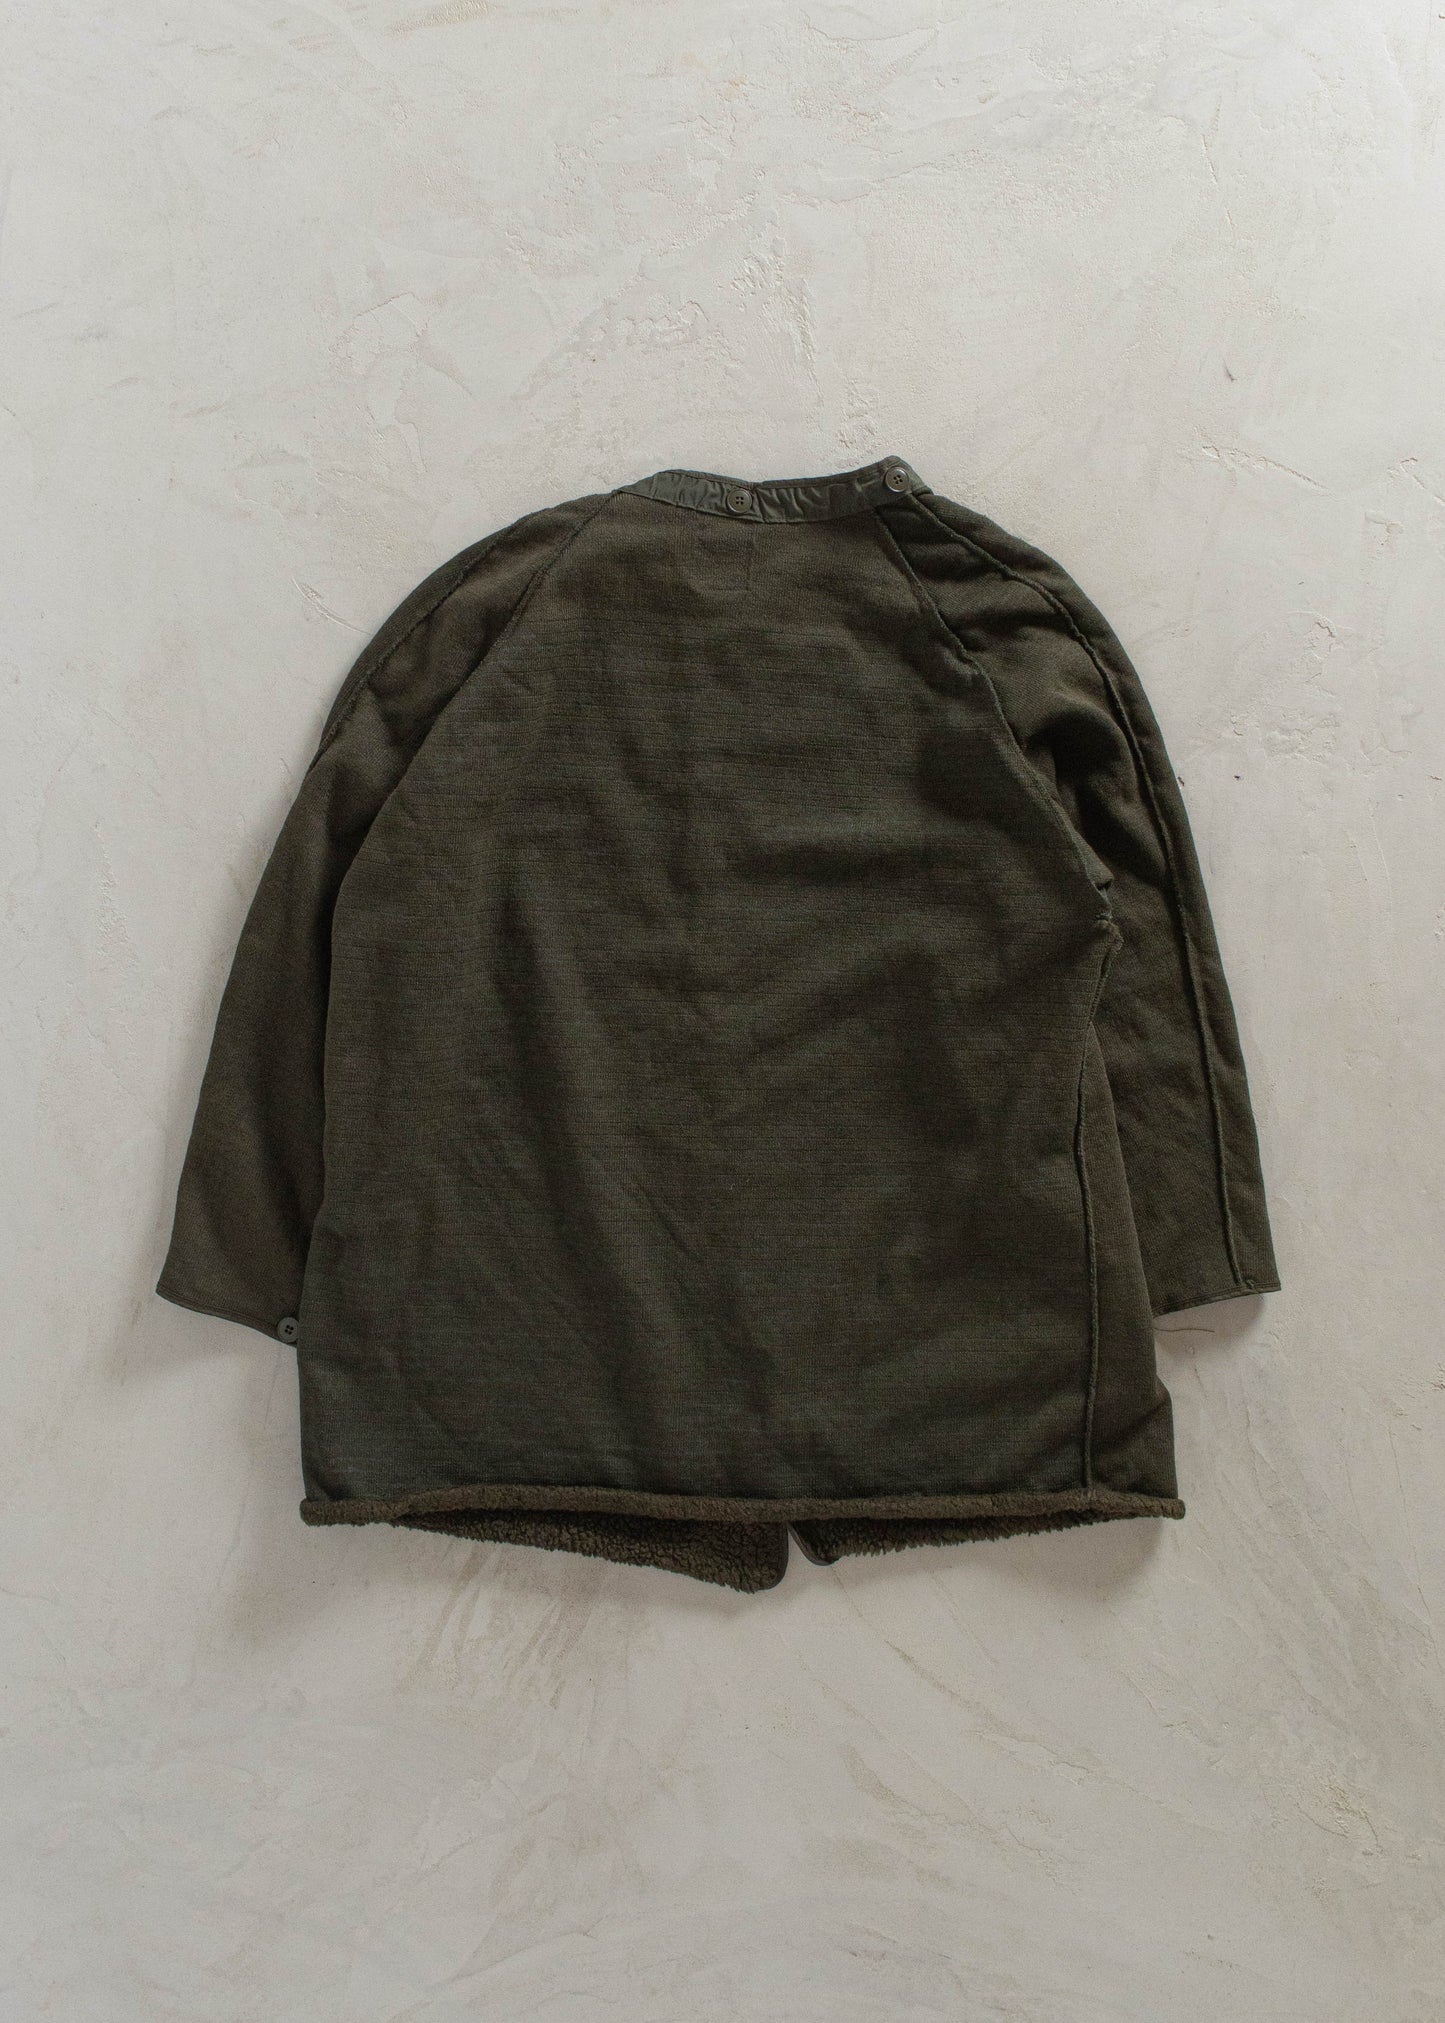 1980s French Military Liner Jacket Size M/L